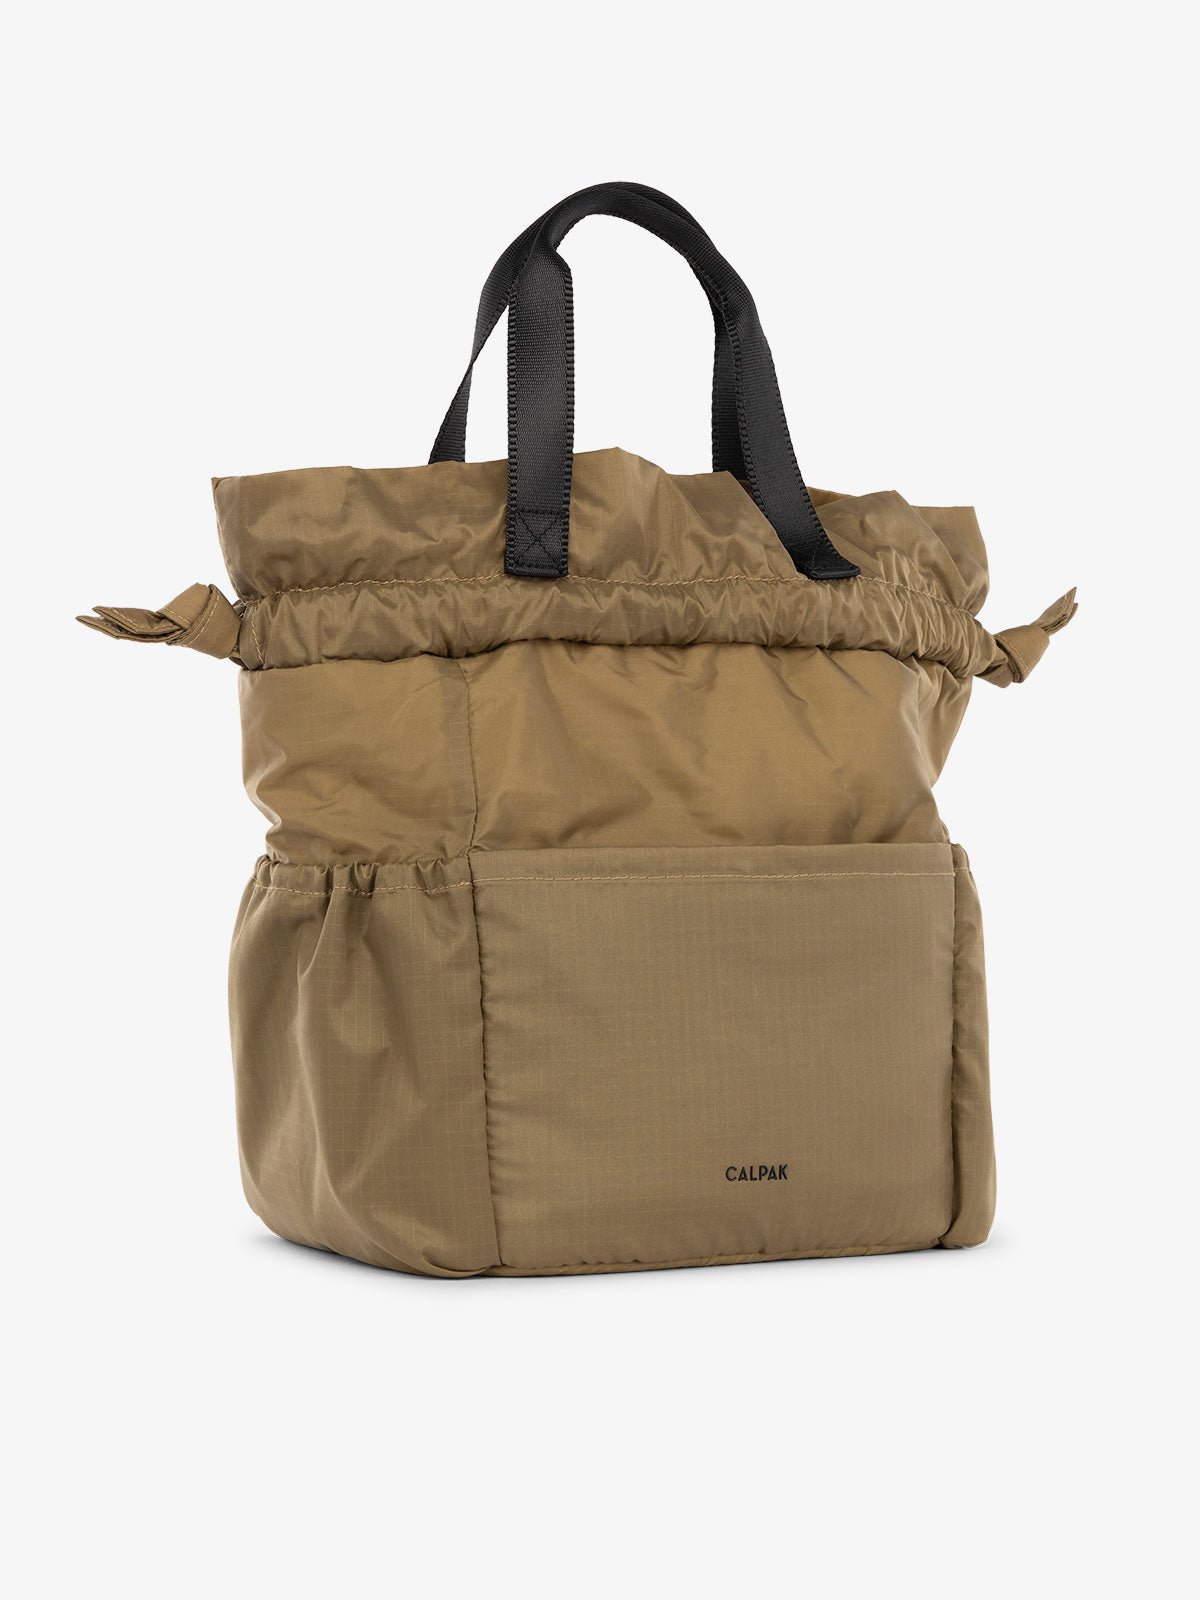 CALPAK Insulated Lunch Bag for men with multiple pockets and drawstring closure in khaki